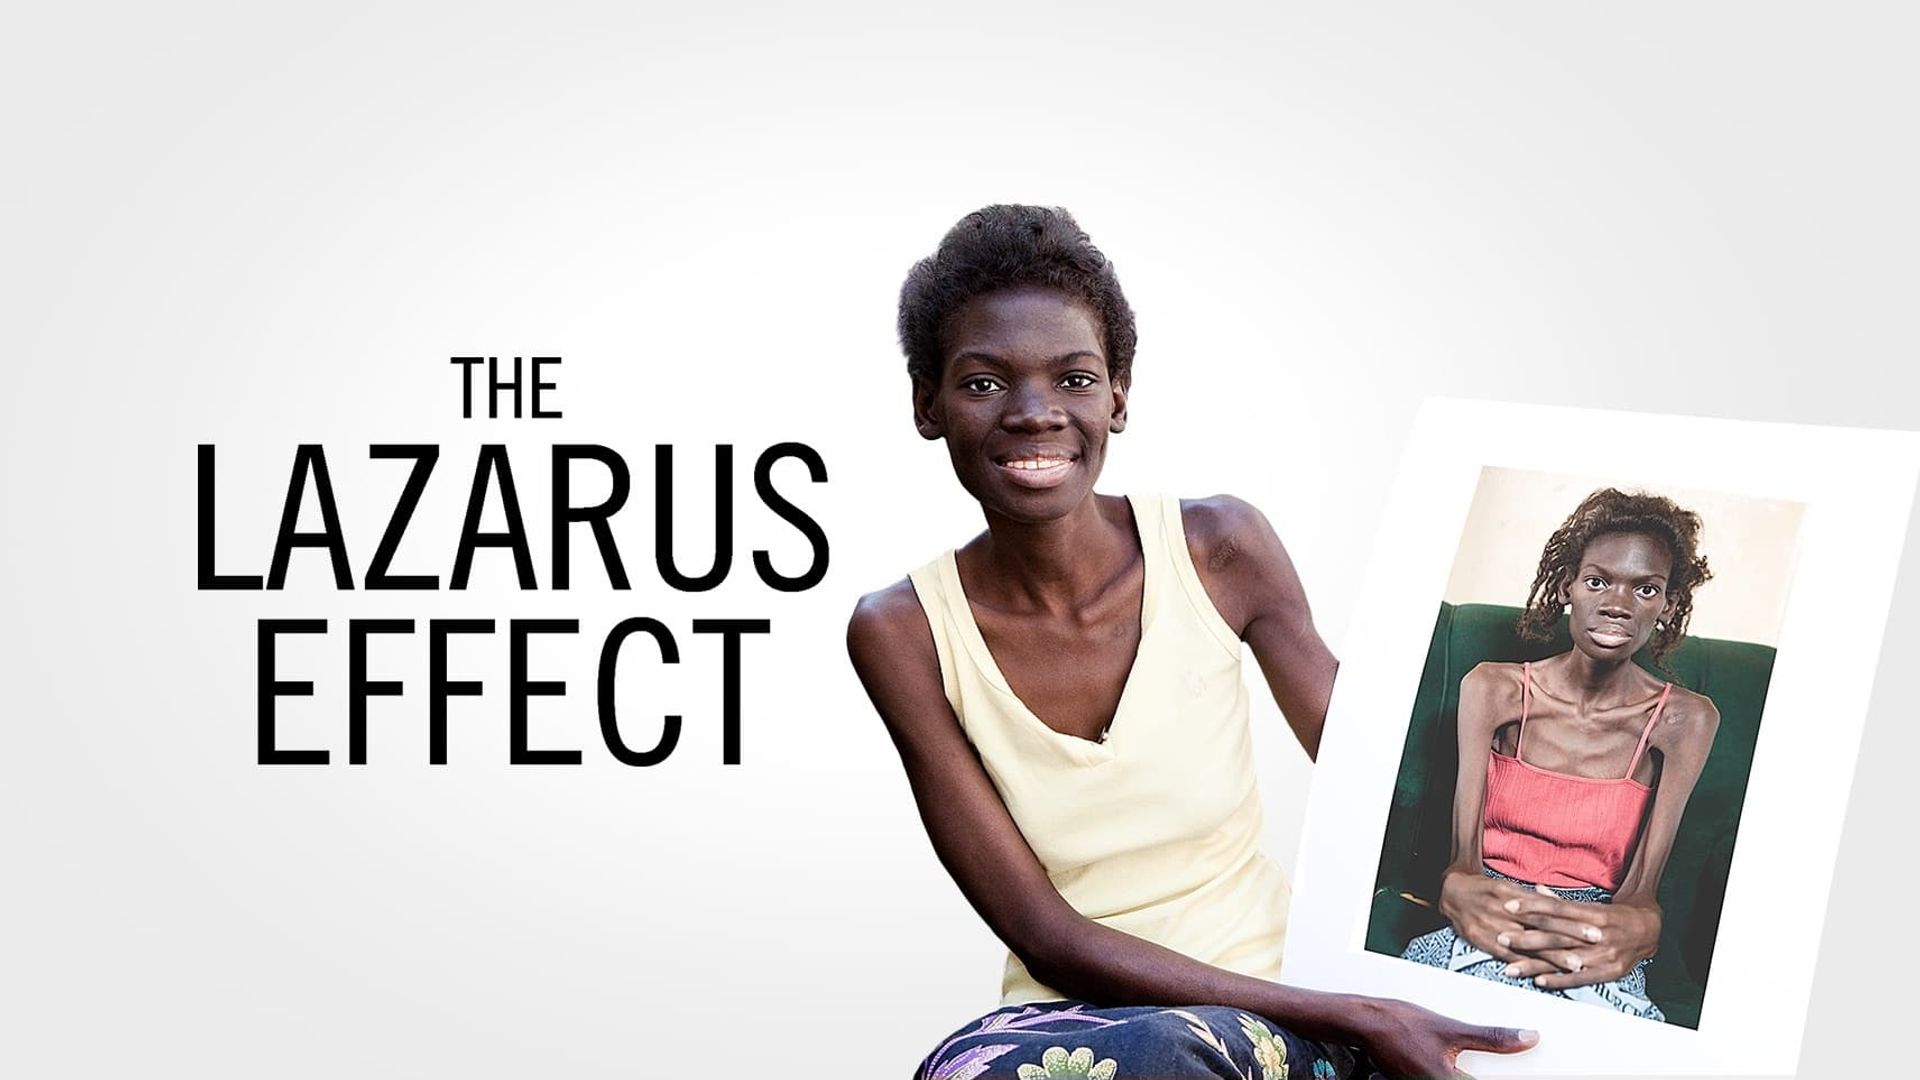 The Lazarus Effect background